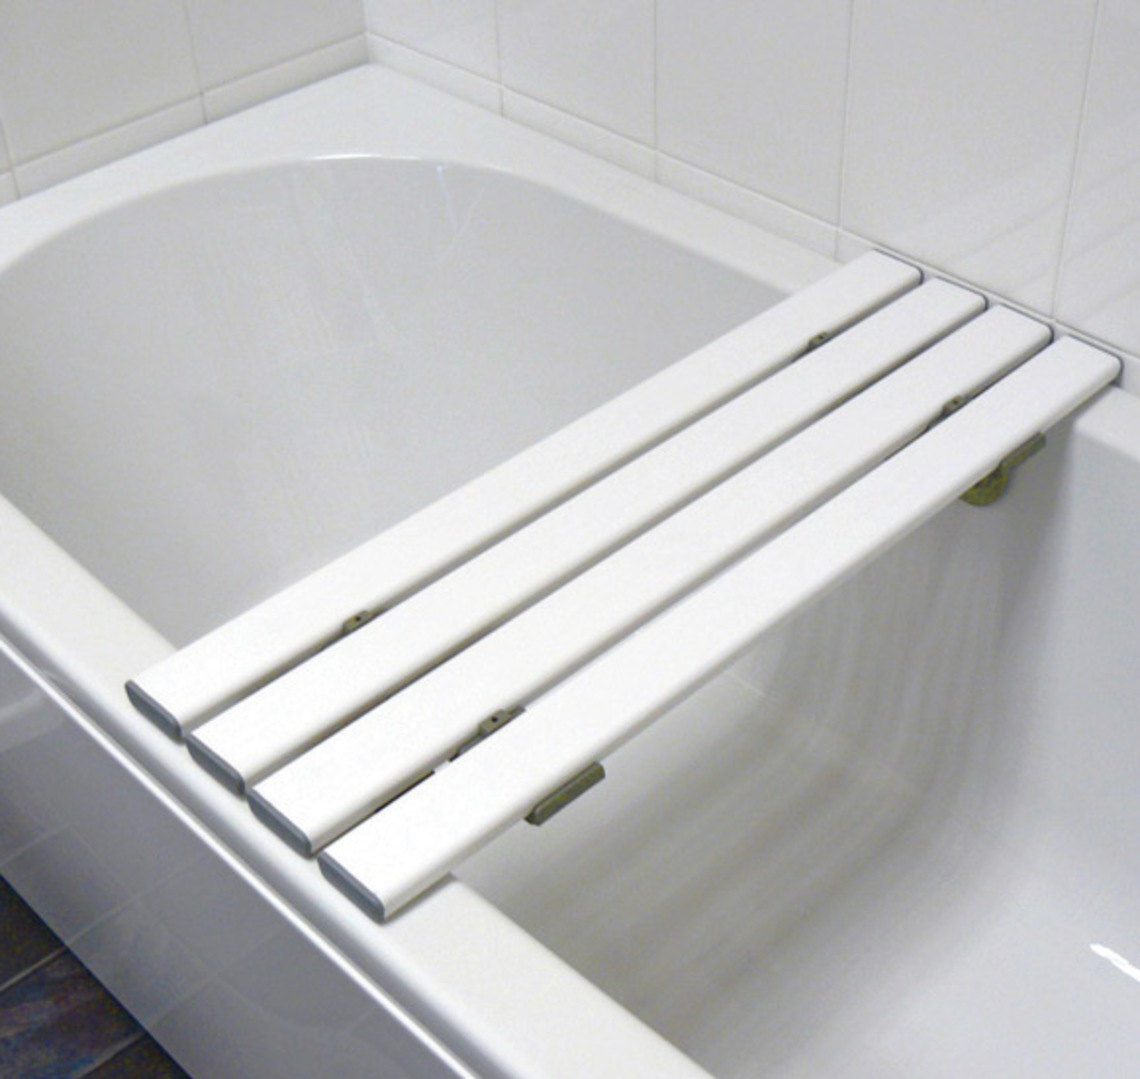 Savanagh slatted bath board at true mobility didcot oxfordshire